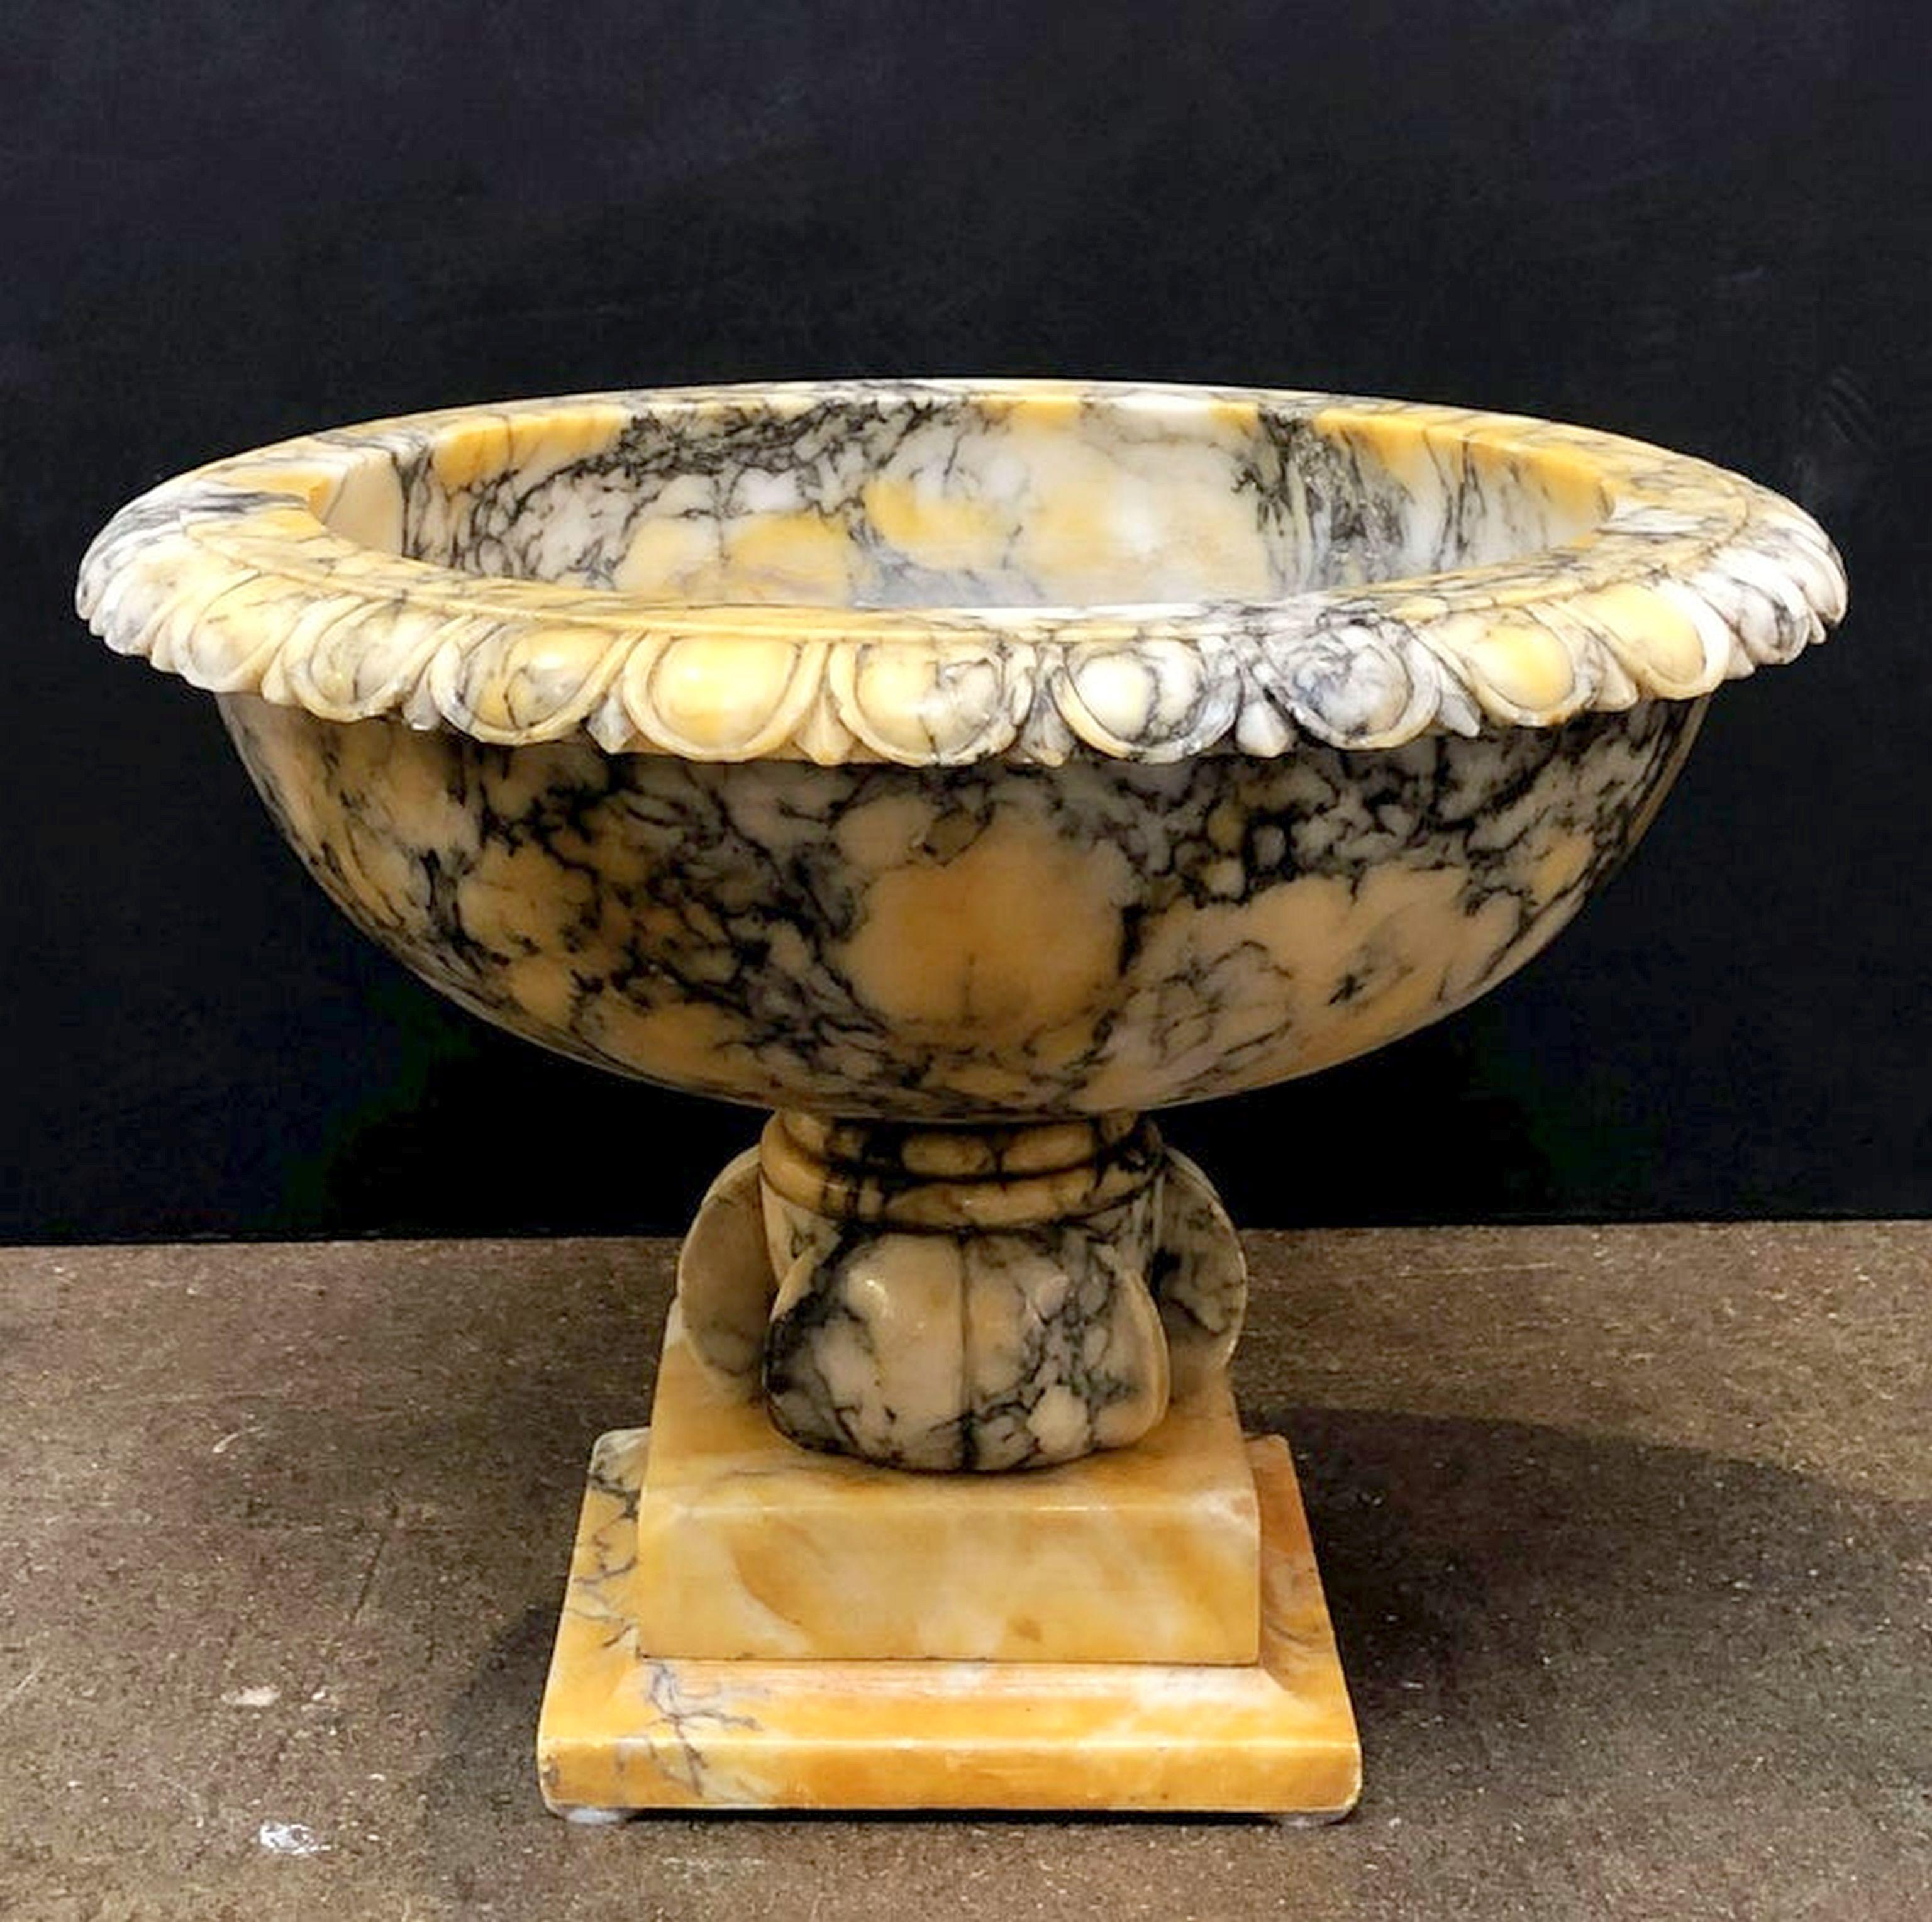 A fine urn or pot of alabaster in the Classical style from Italy, featuring an egg-and-dart rolled edge, over a circular bowl-shaped body, set upon a raised square plinth.